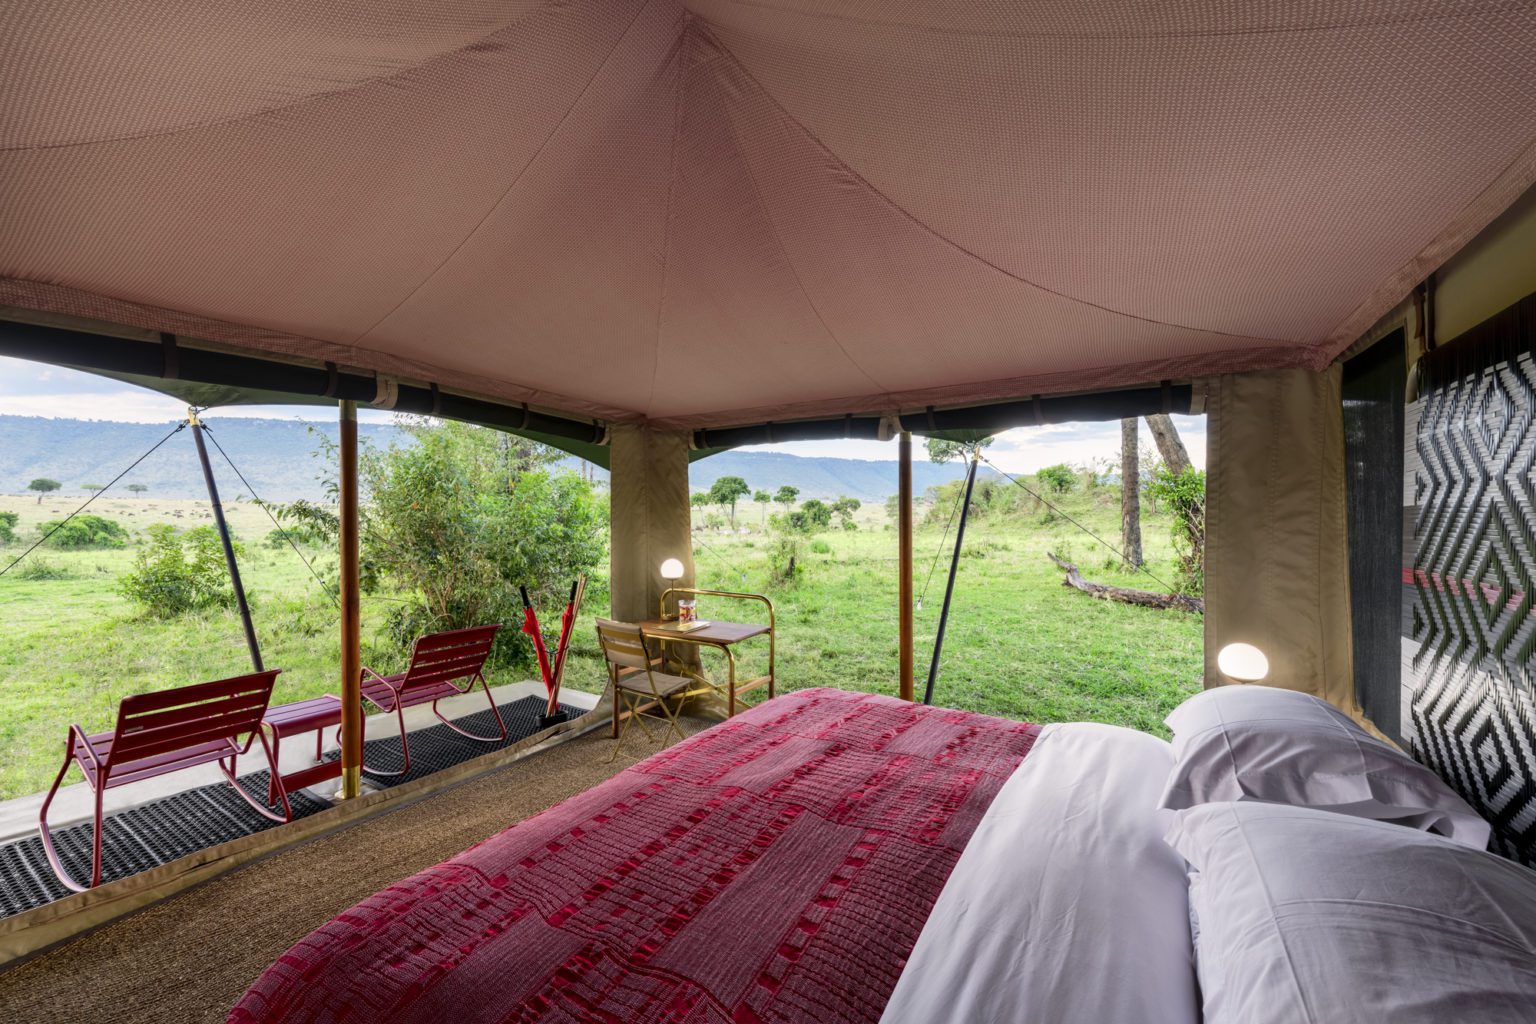 interior of a safari tent with a red blanket on the bed and open canvas sides with views into the bush.